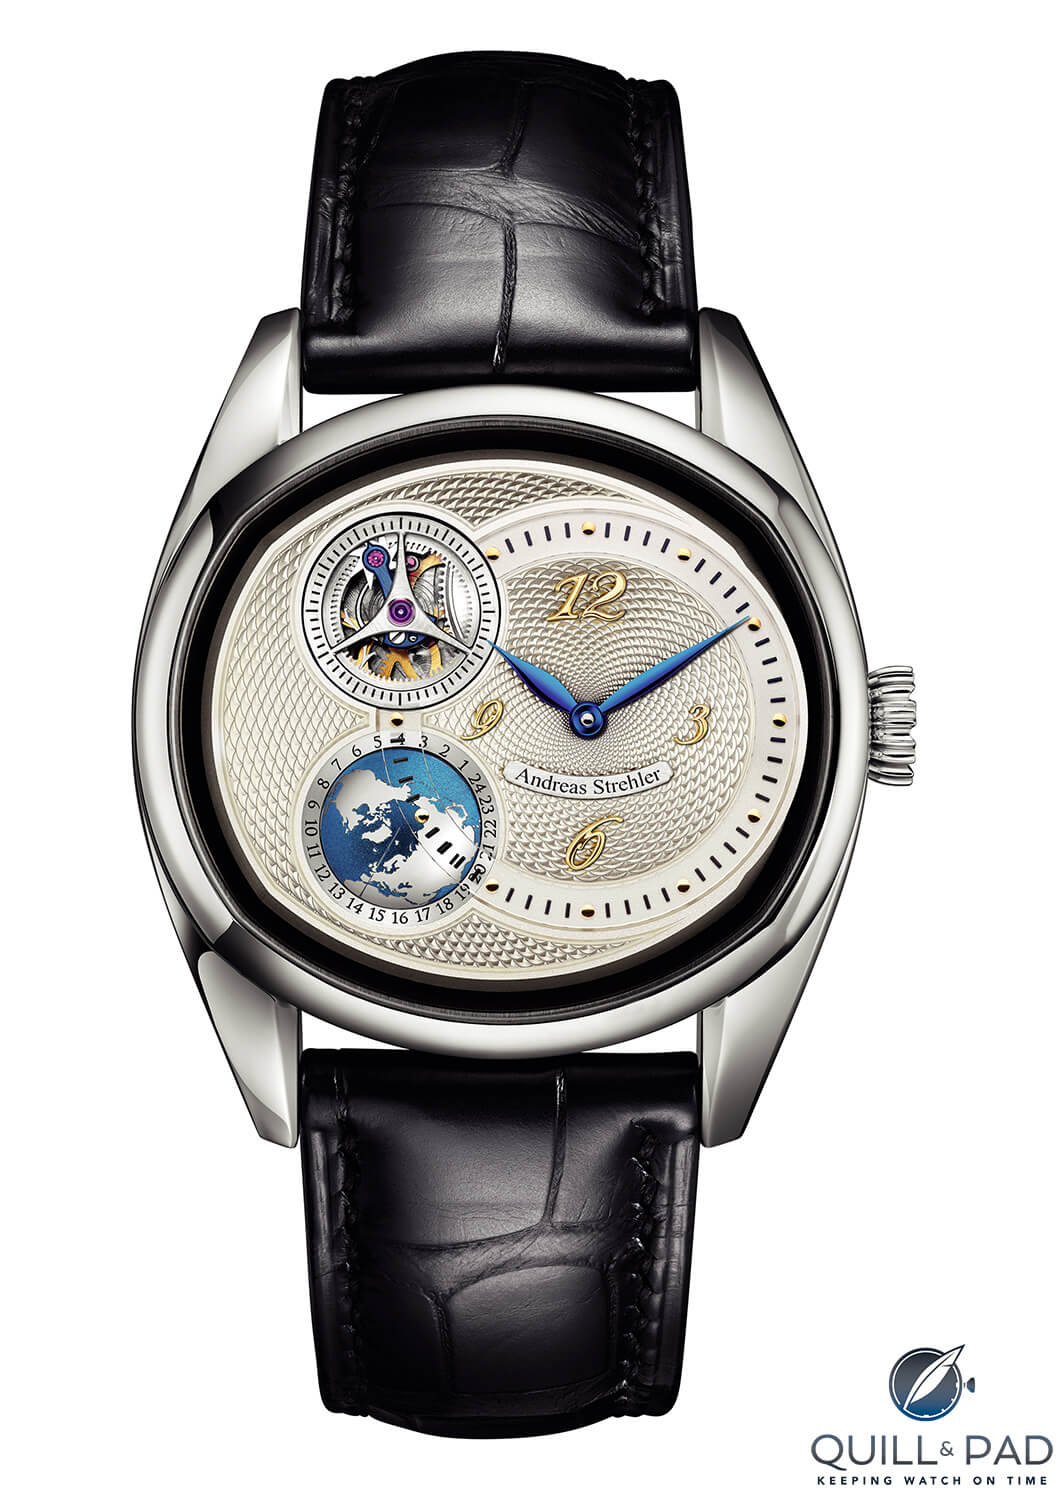 Andreas Strehler Sauterelle à Heure Mondiale with silver dial